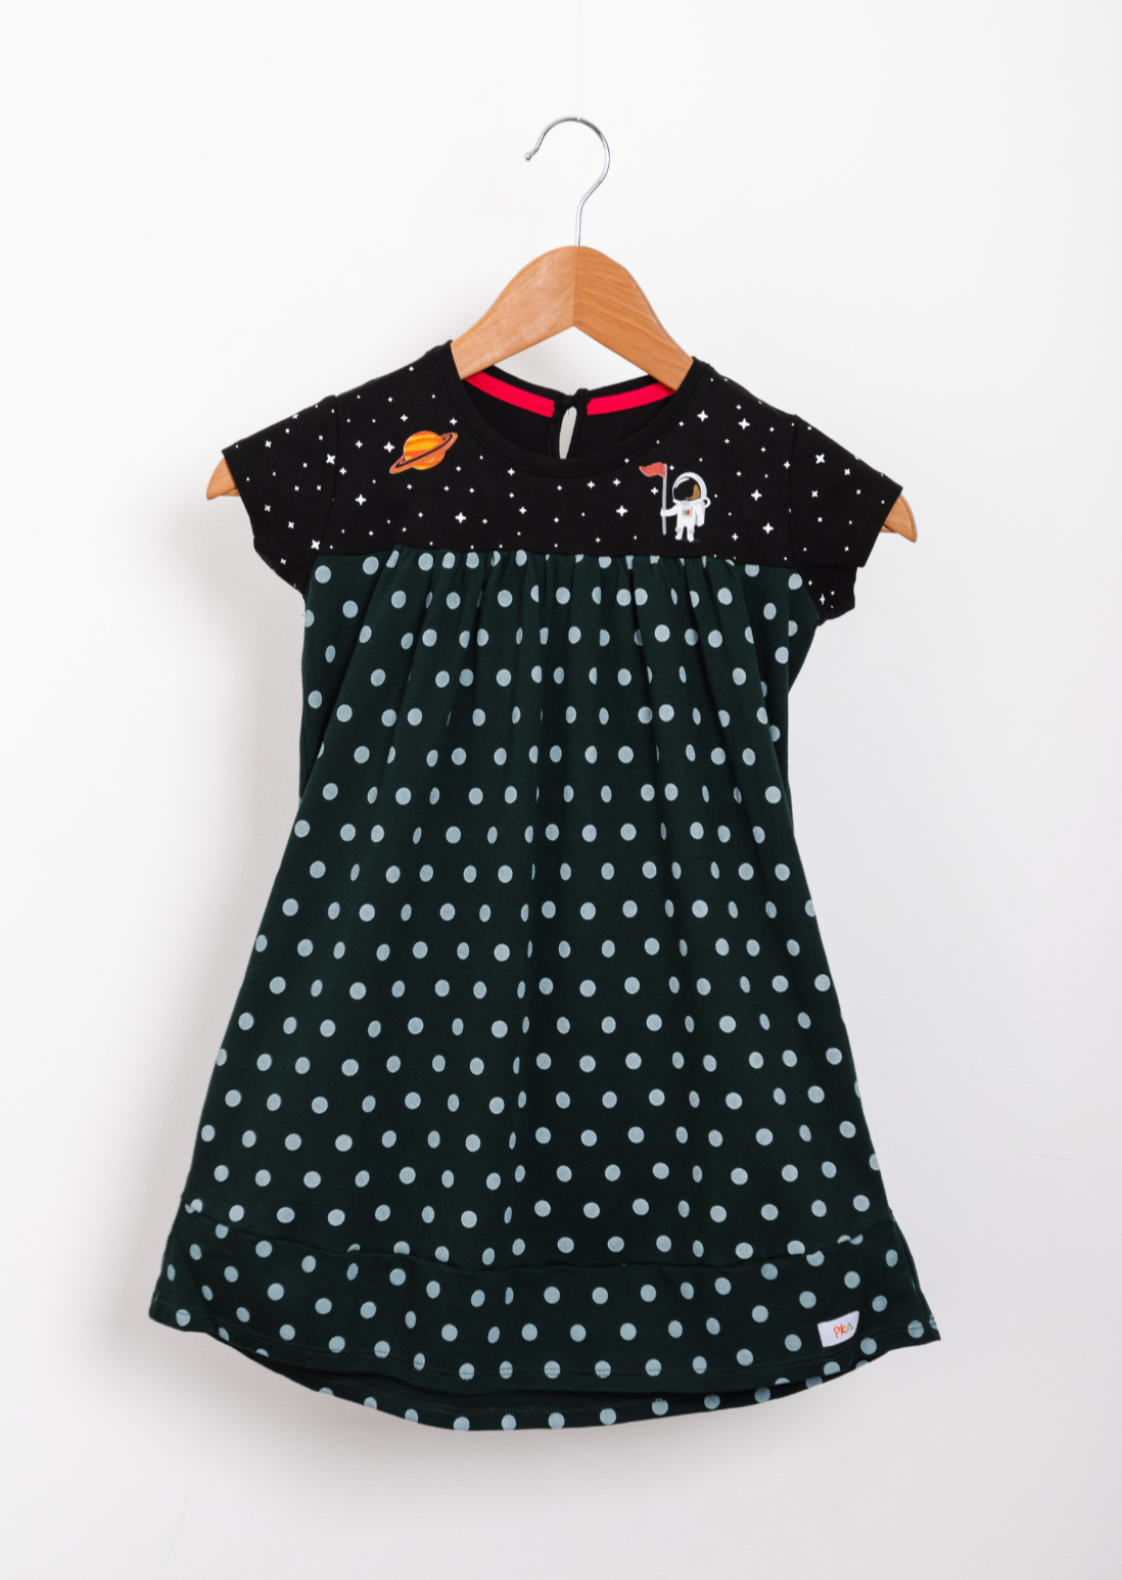 Space Dress with pockets, princess style made in Peruvian pima Cotton - Prisma Kiddos, girl dress, fashion for kids